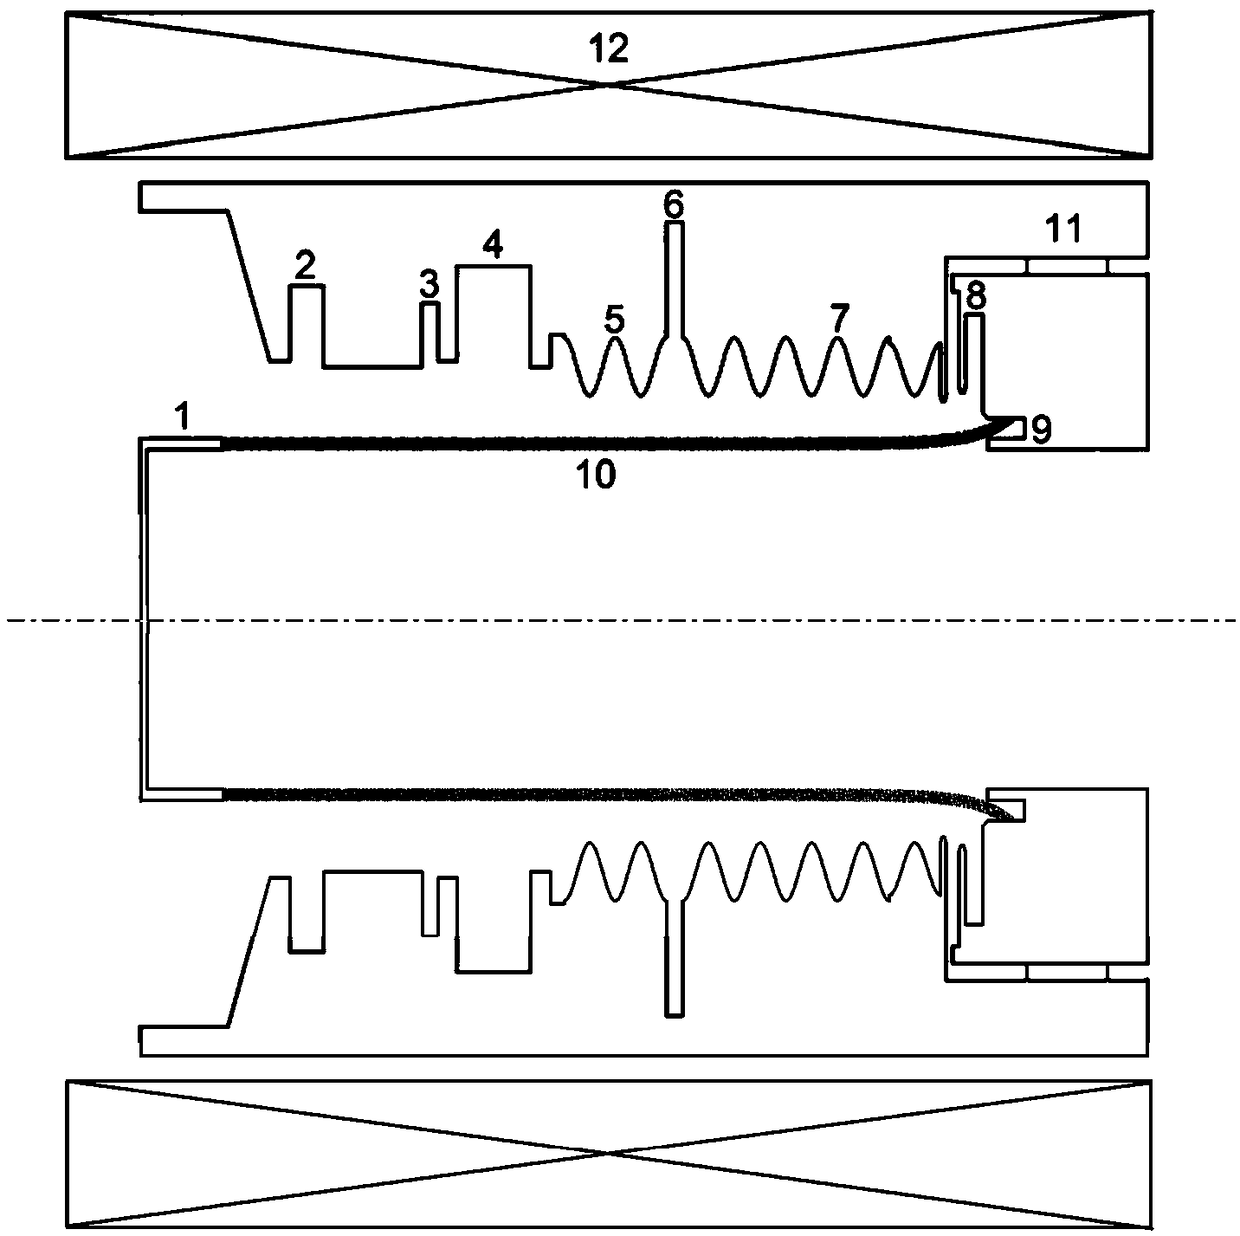 Speed-modulated relativistic backward wave tube which operates in a locally inhomogeneous magnetic field